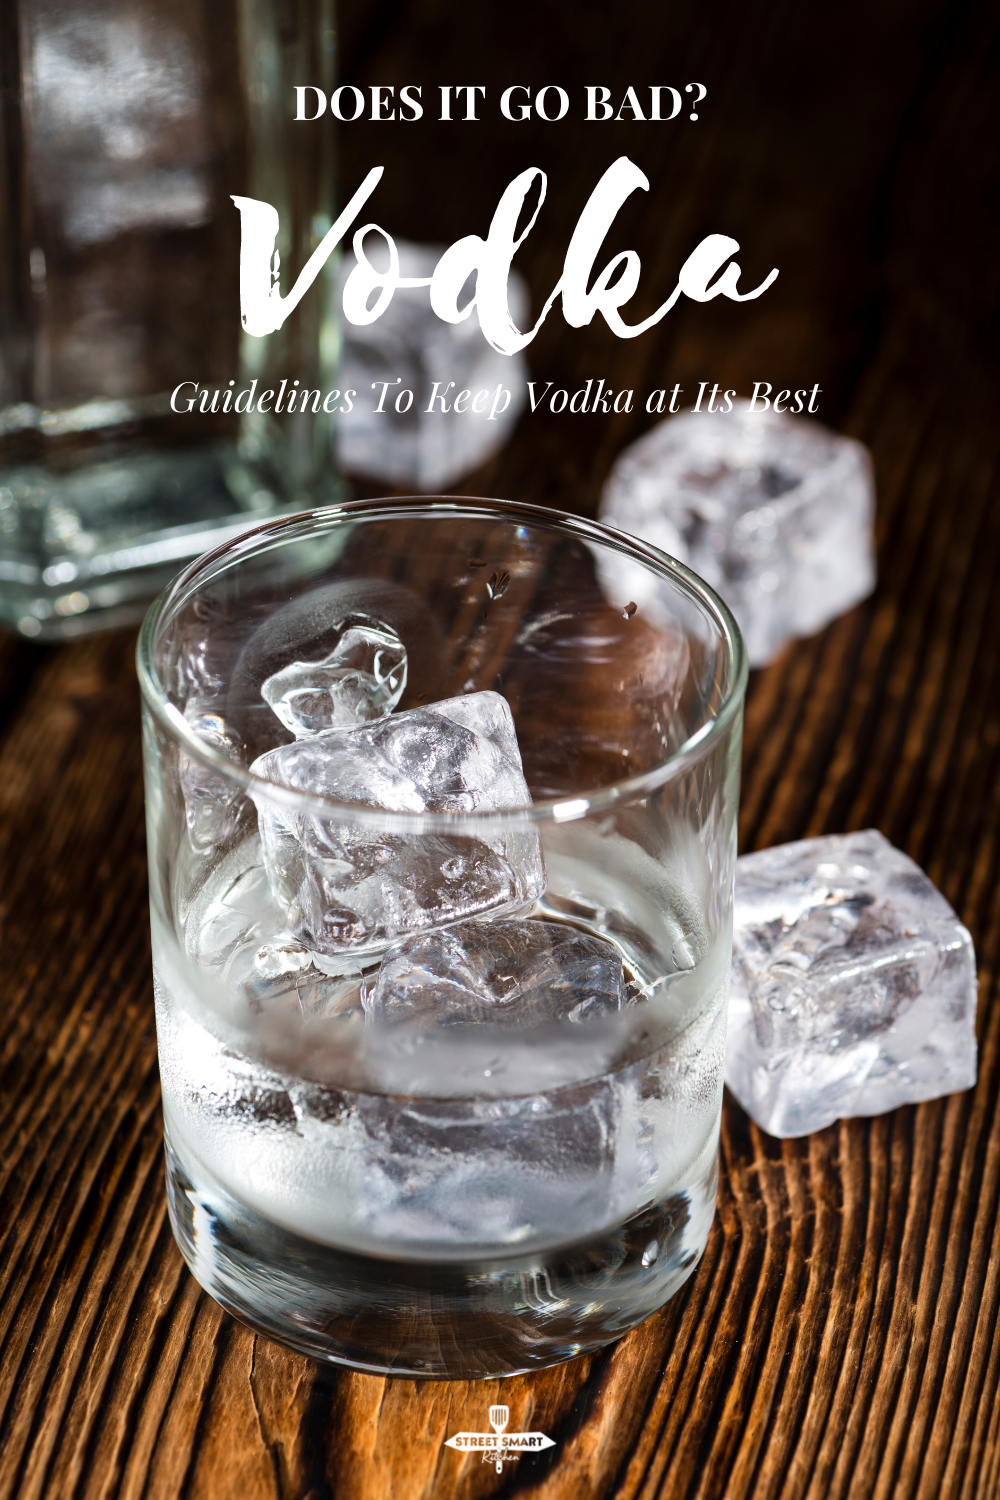 Does vodka go bad? It can if stored improperly. Learn the shelf life, signs of spoilage, and storage tips to keep your vodka at its best.